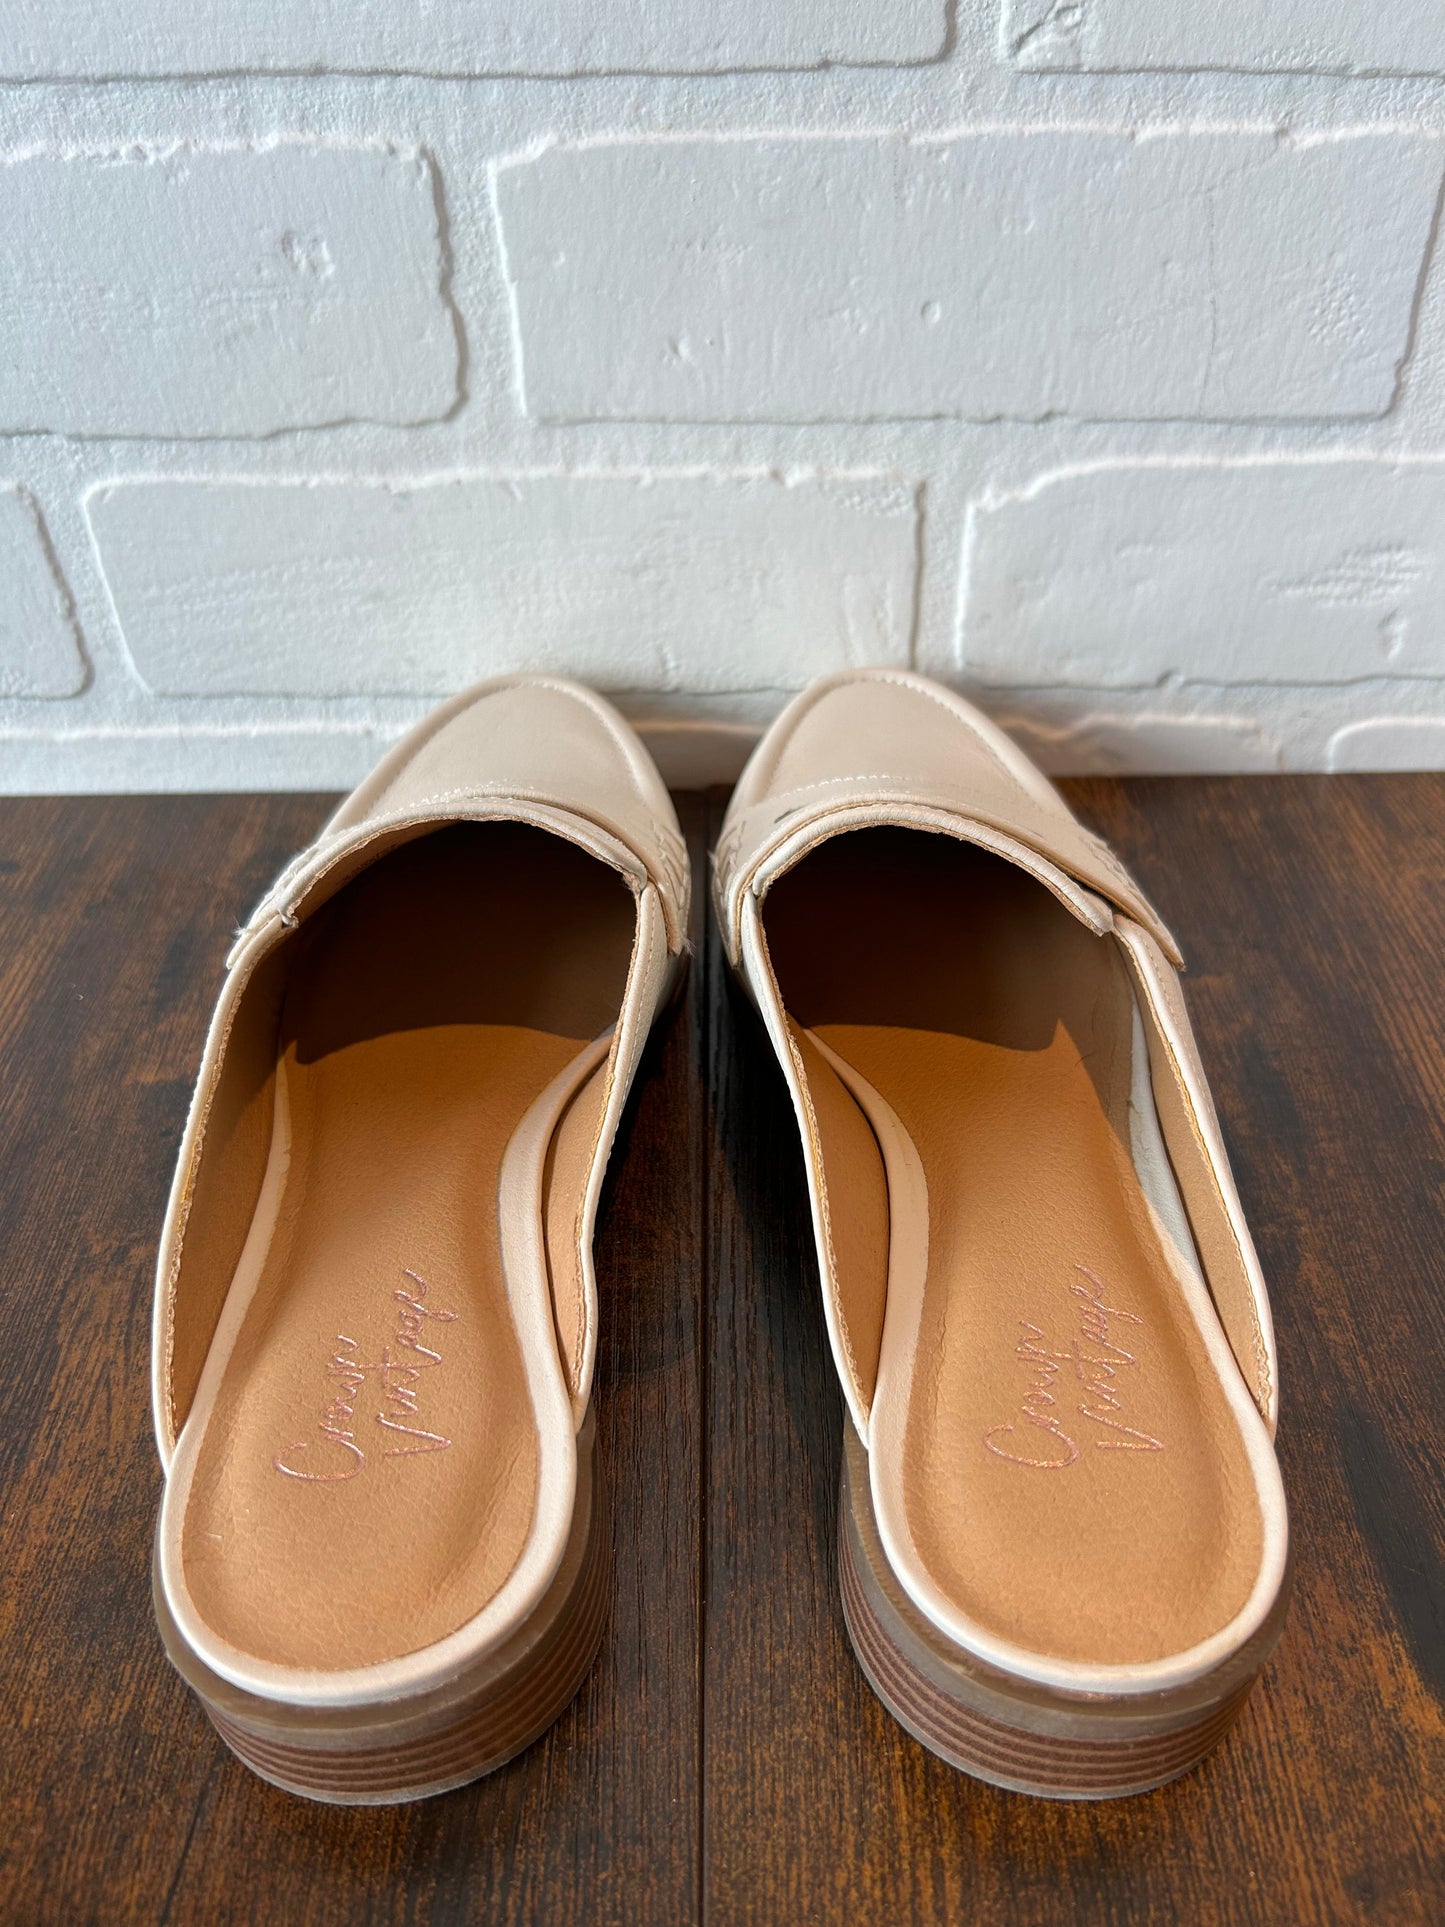 Shoes Flats By Crown Vintage  Size: 6.5